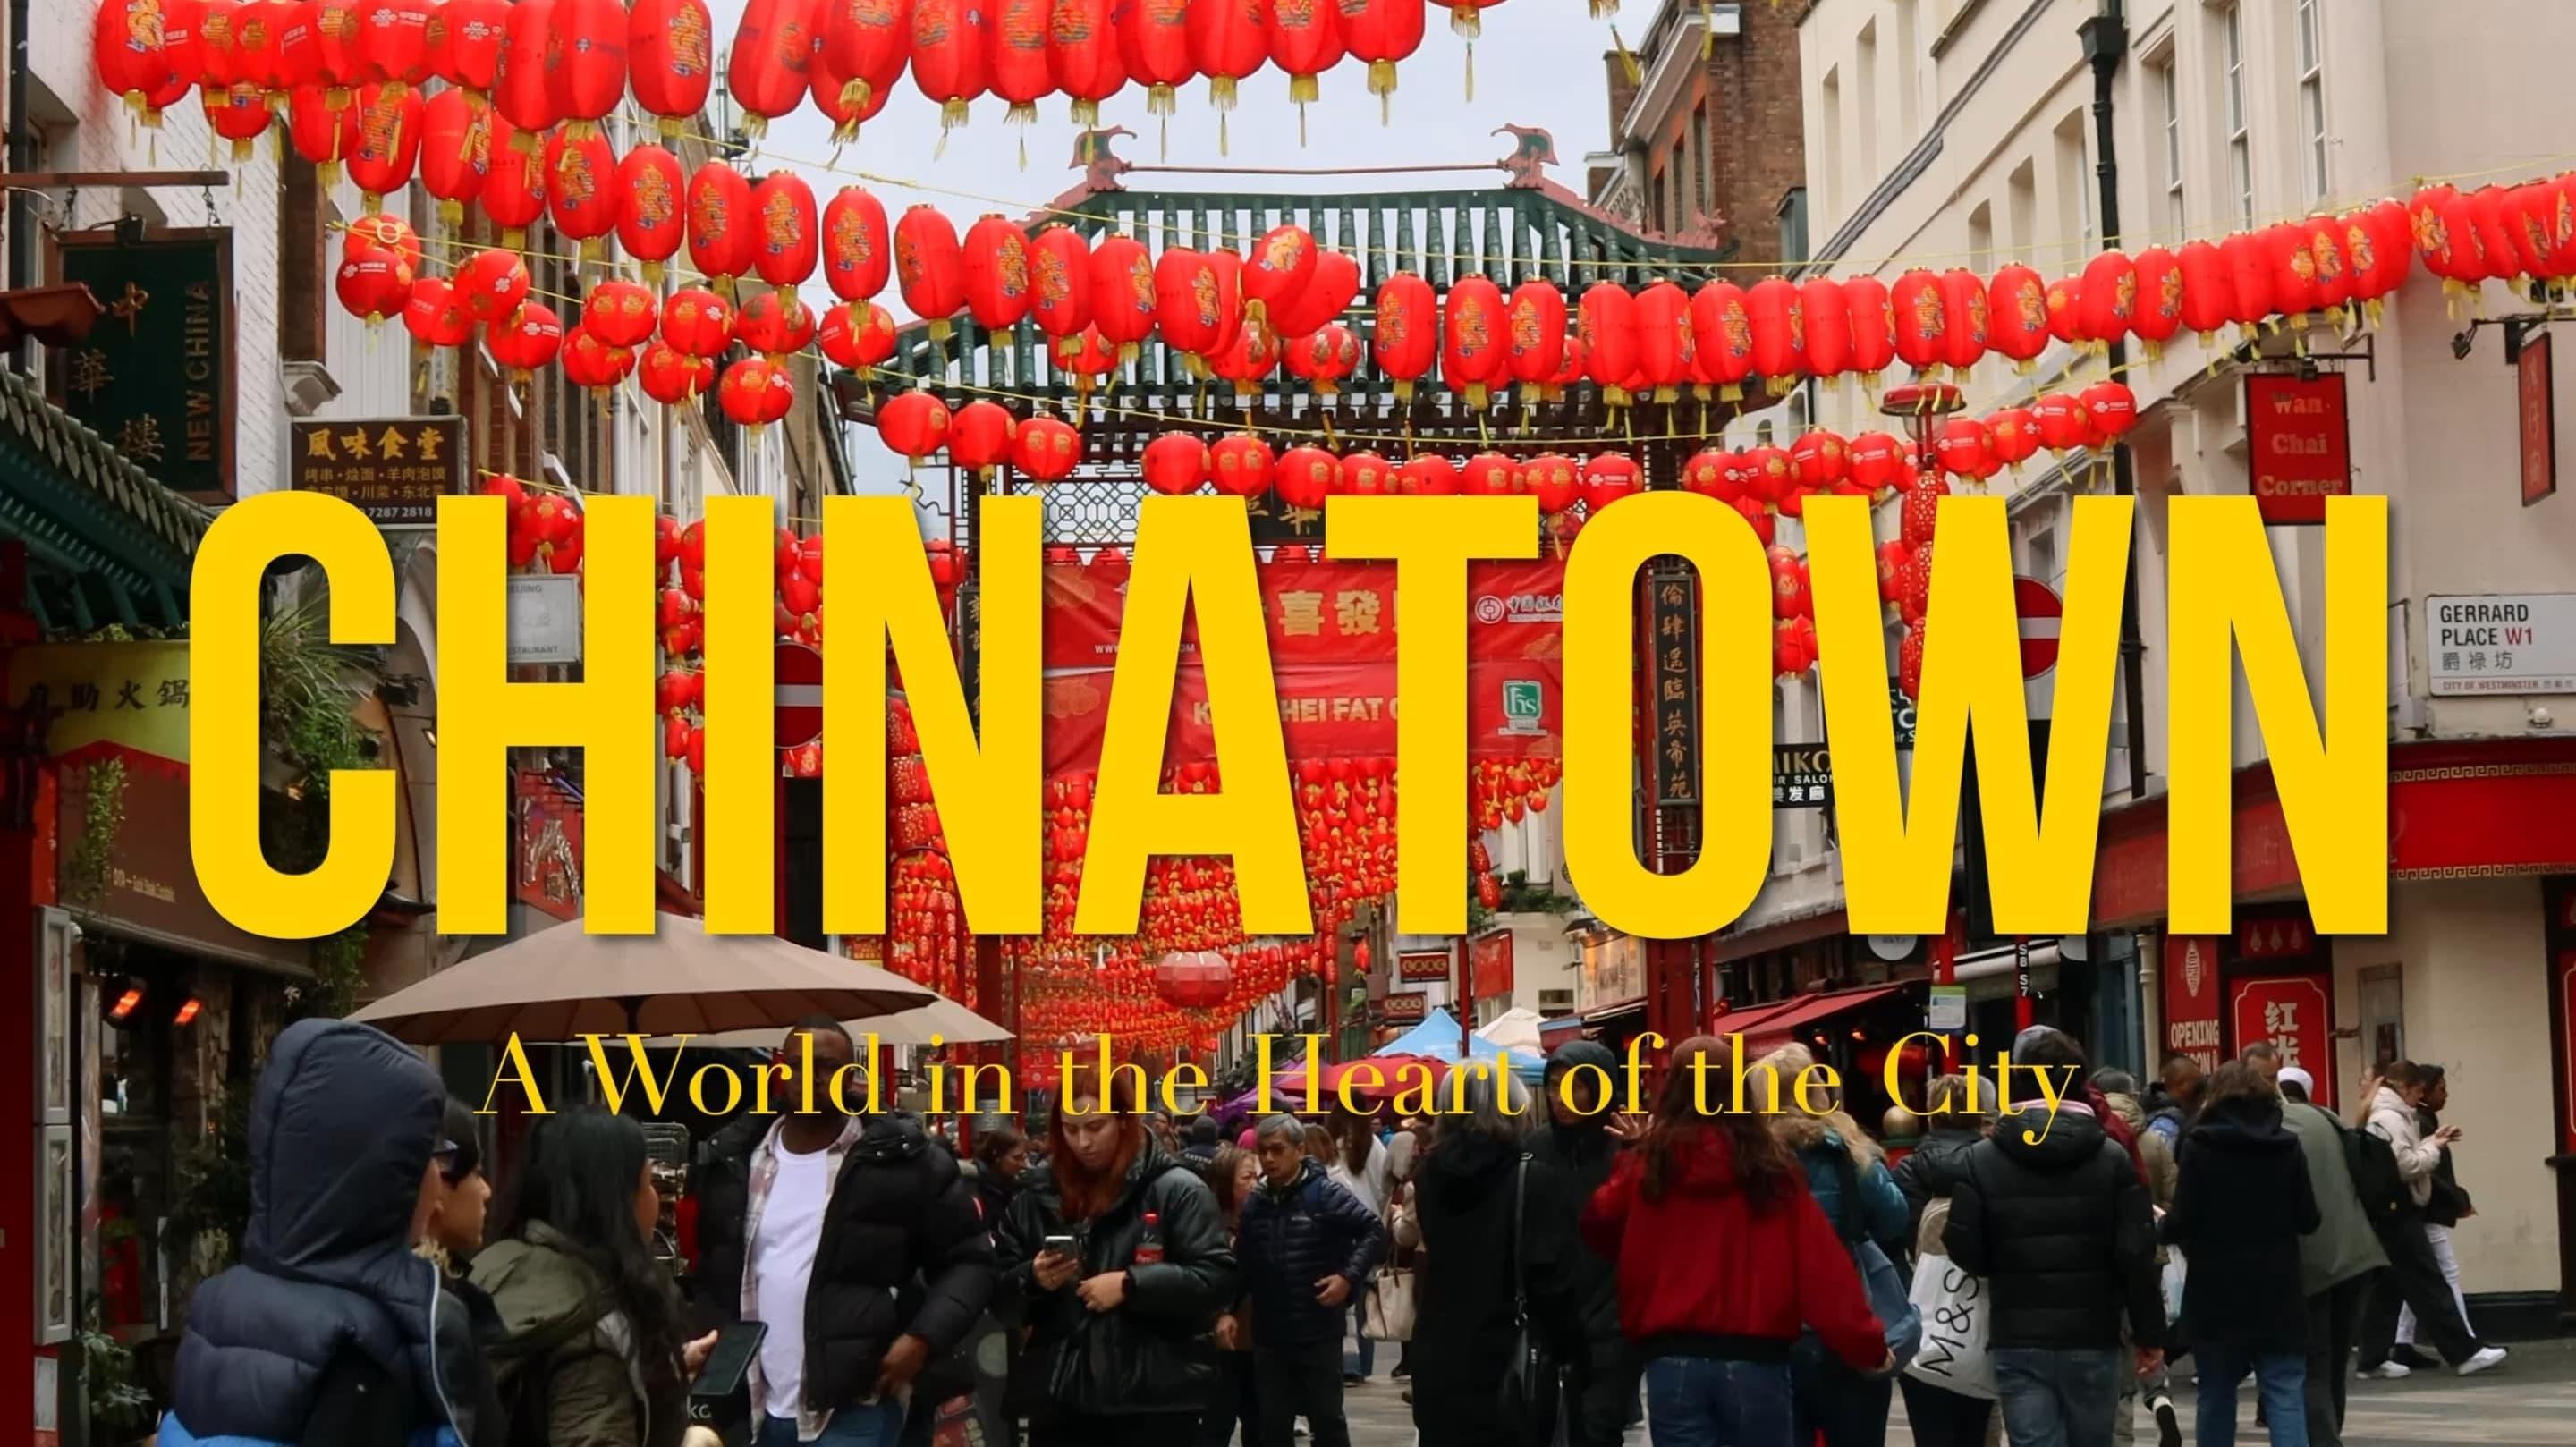 Chinatown: A World in the Heart of the City backdrop